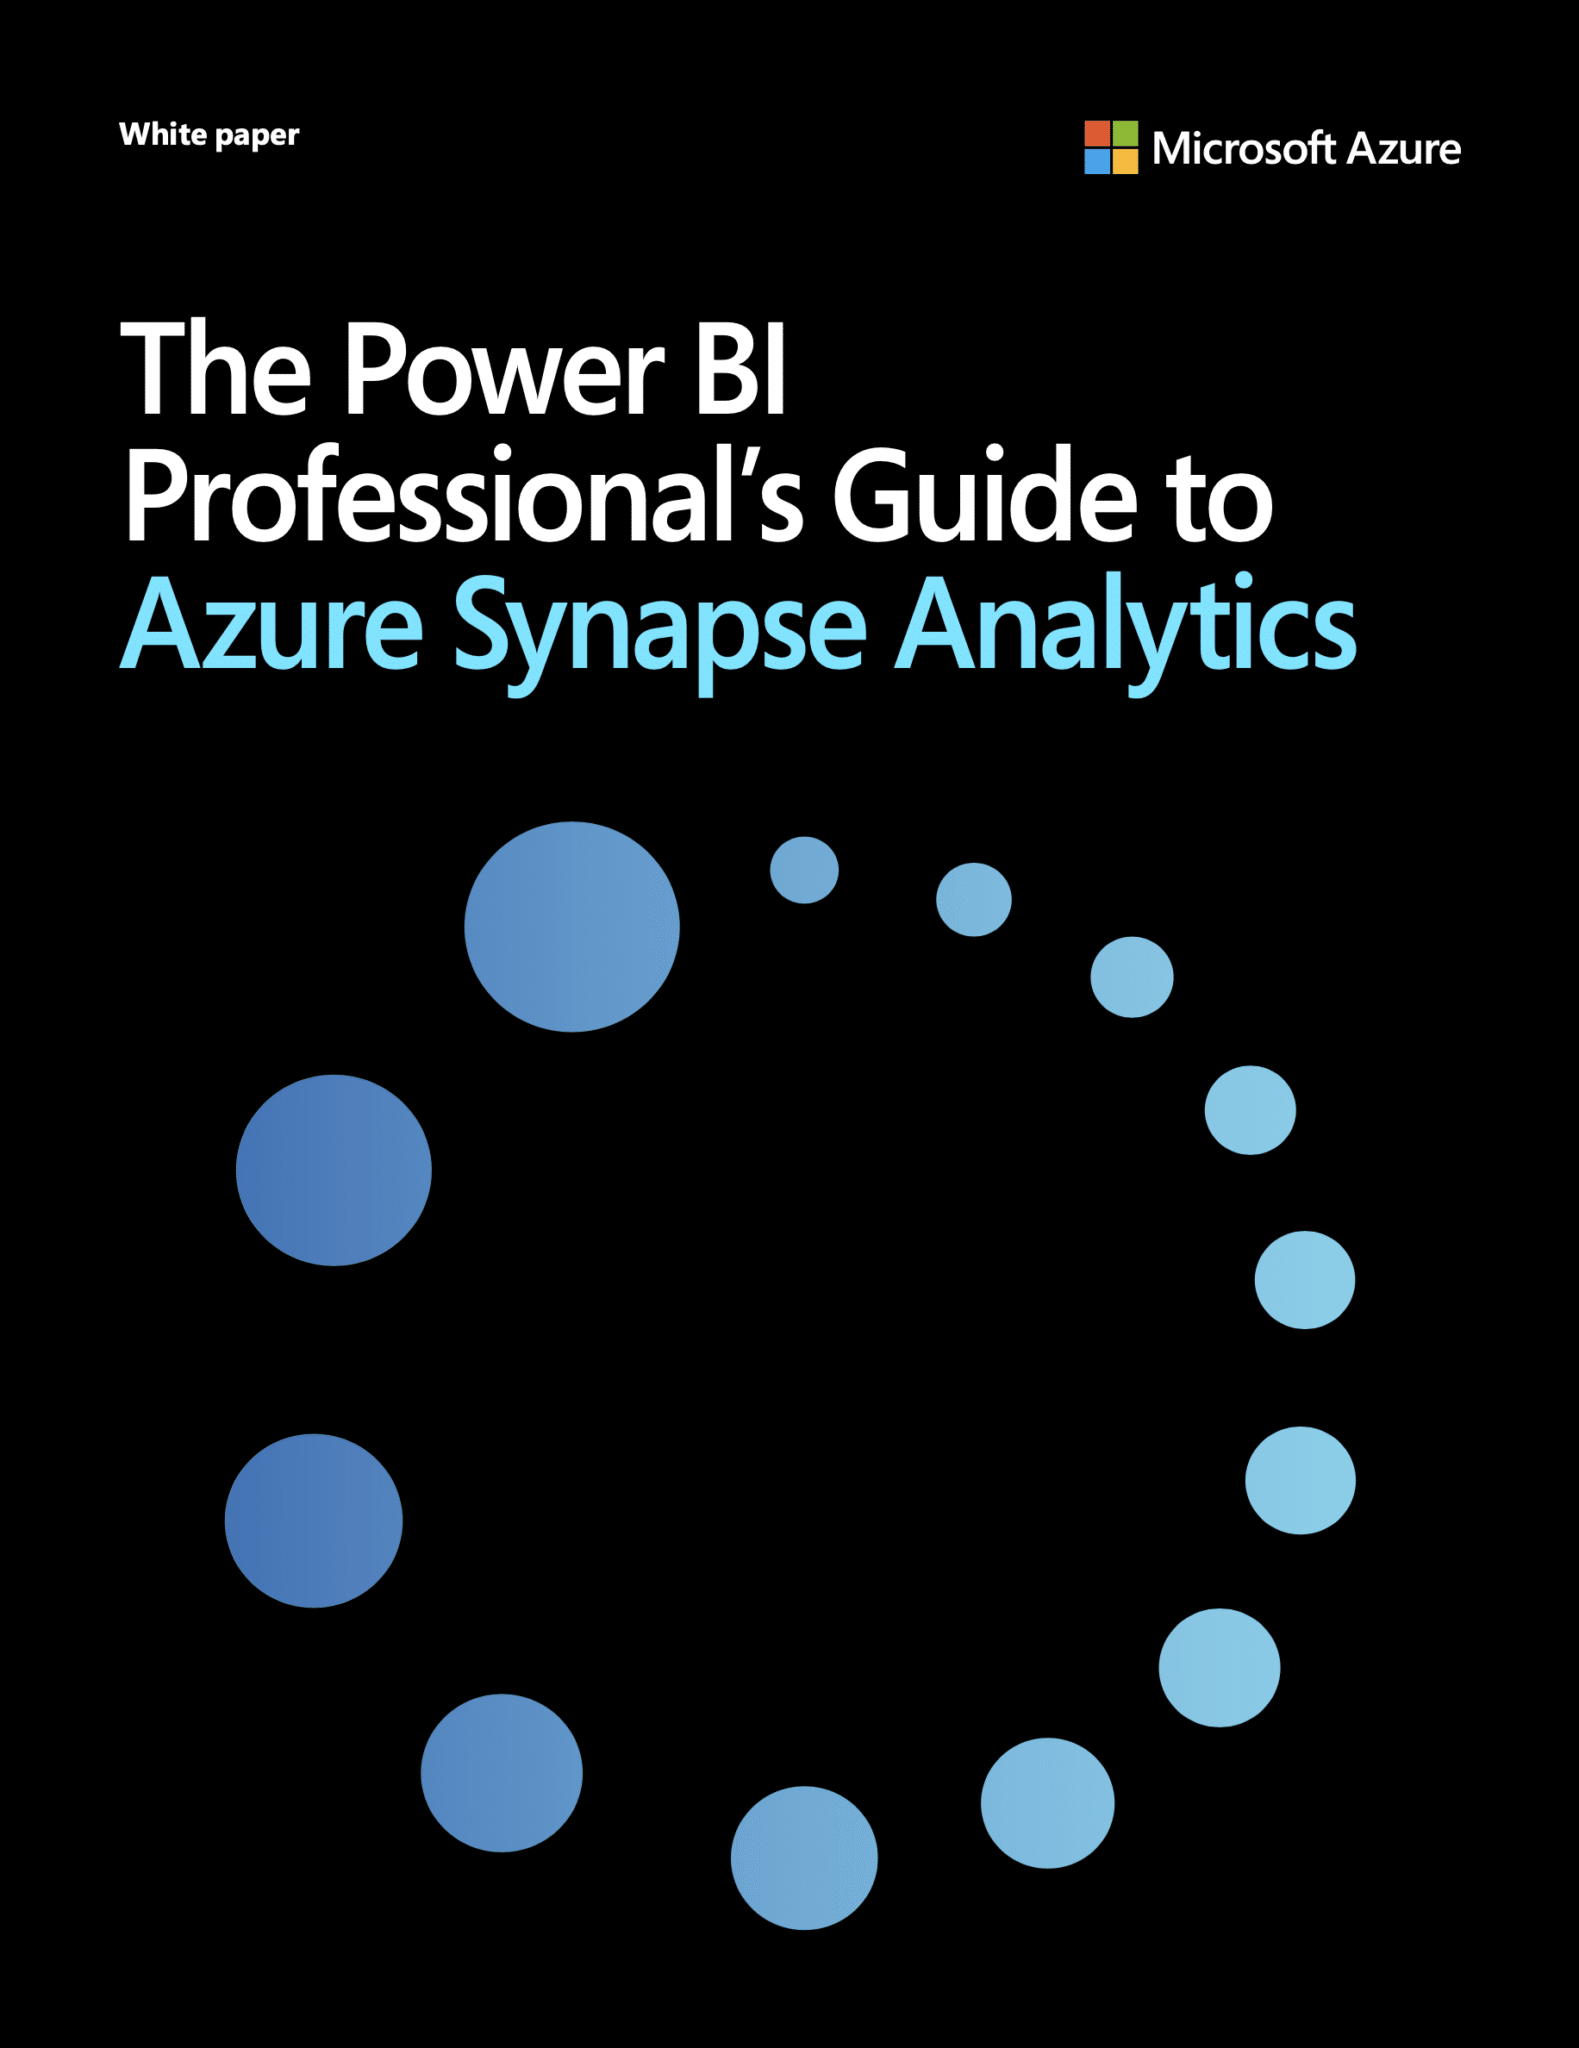 The Power BI Professional’s Guide to Azure Synapse Analytics 2